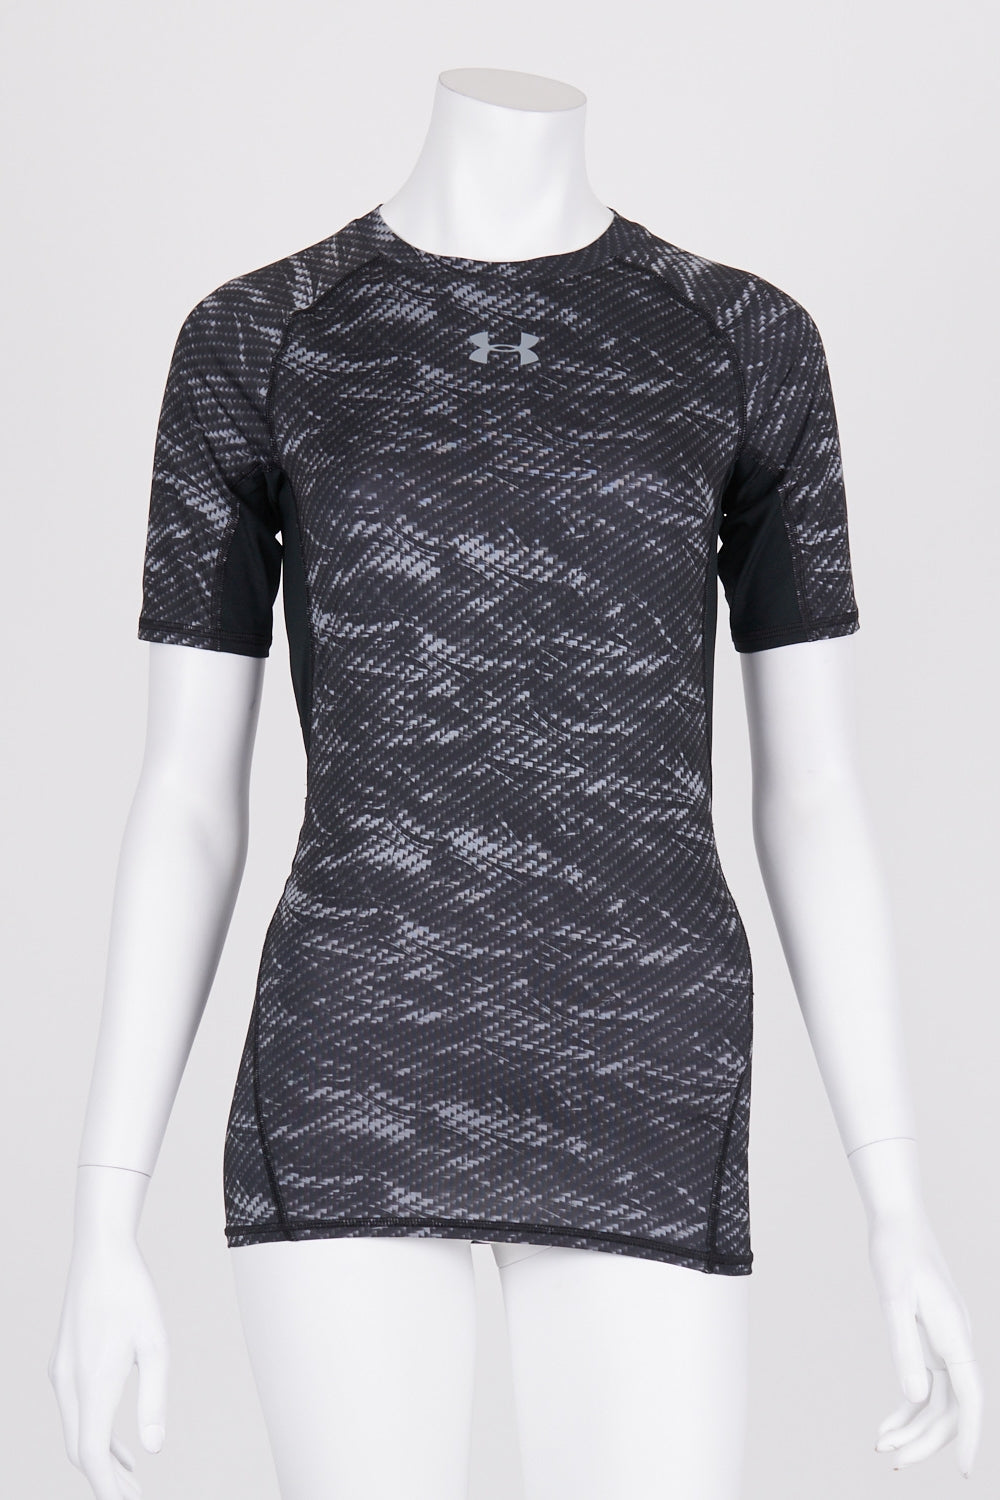 Under Armour Black Patterned Top S/M